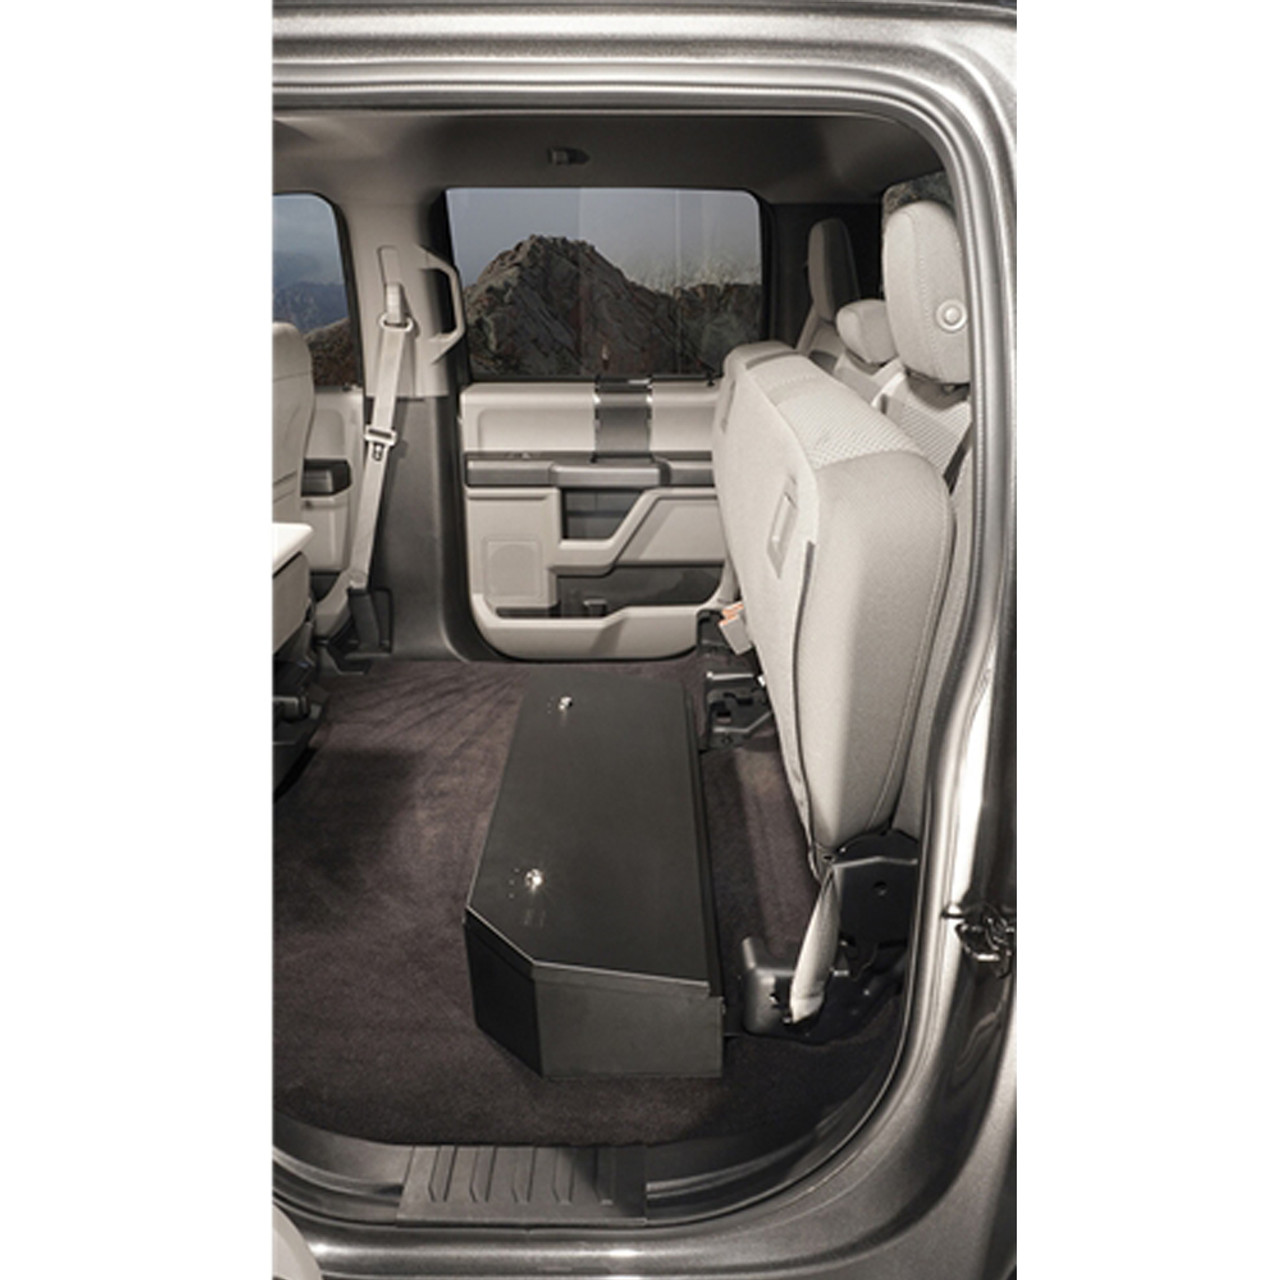 Tuffy Security 344-01 Ford F-Series SuperCrew CrewCab, 2015+ Under Rear 60 Percent Bench Seat Lock Box, 37x13x8,  Weather Resistant, Welded 16 Gauge steel construction, Durable texture powder coat finish